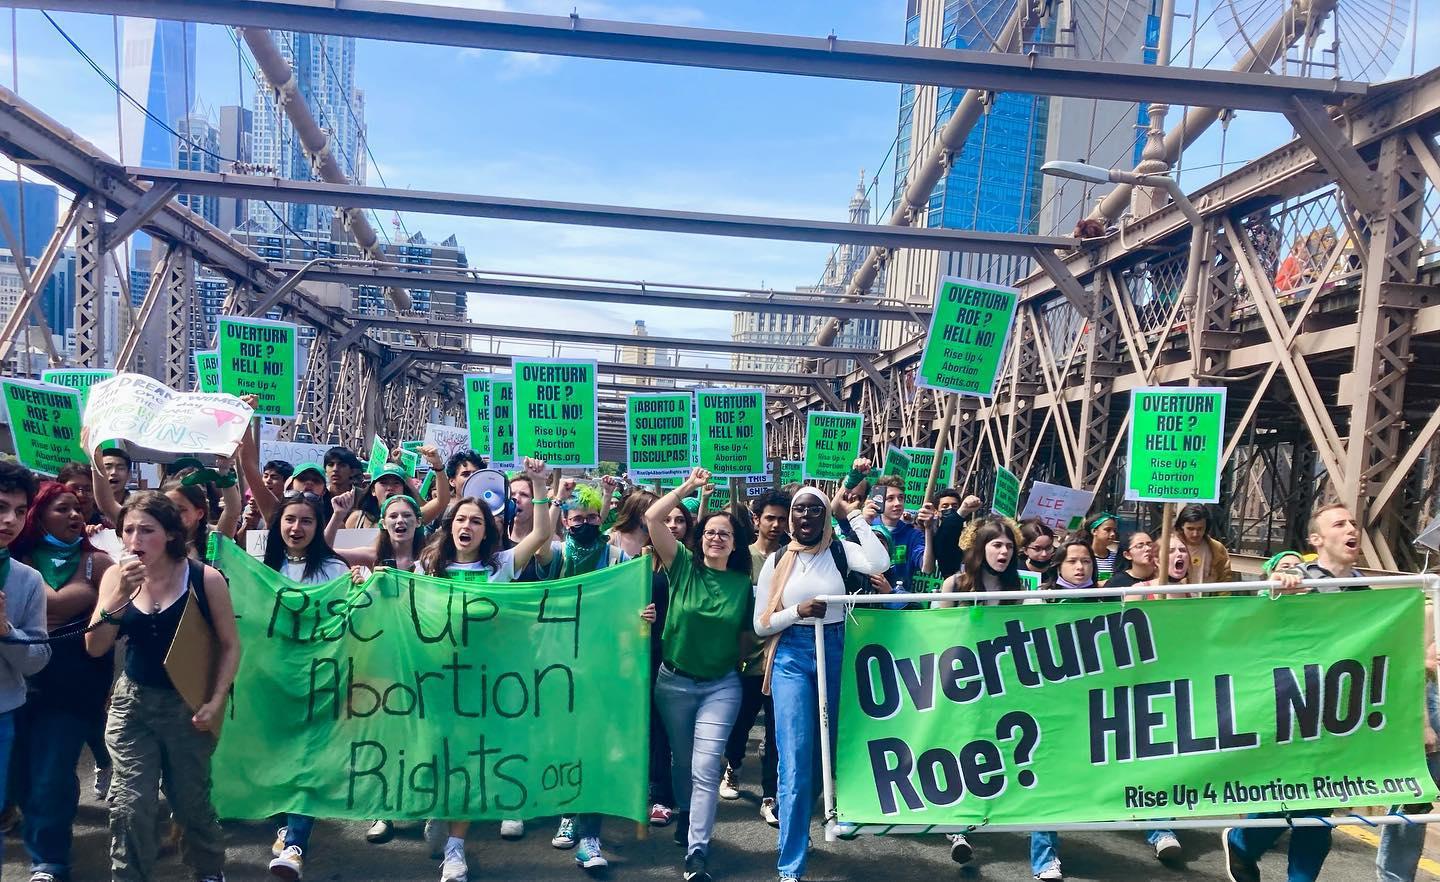 Rise Up 4 Abortion Rights leads people across Brooklyn Bridge May 26, 2022 to stop overturning Roe v Wade